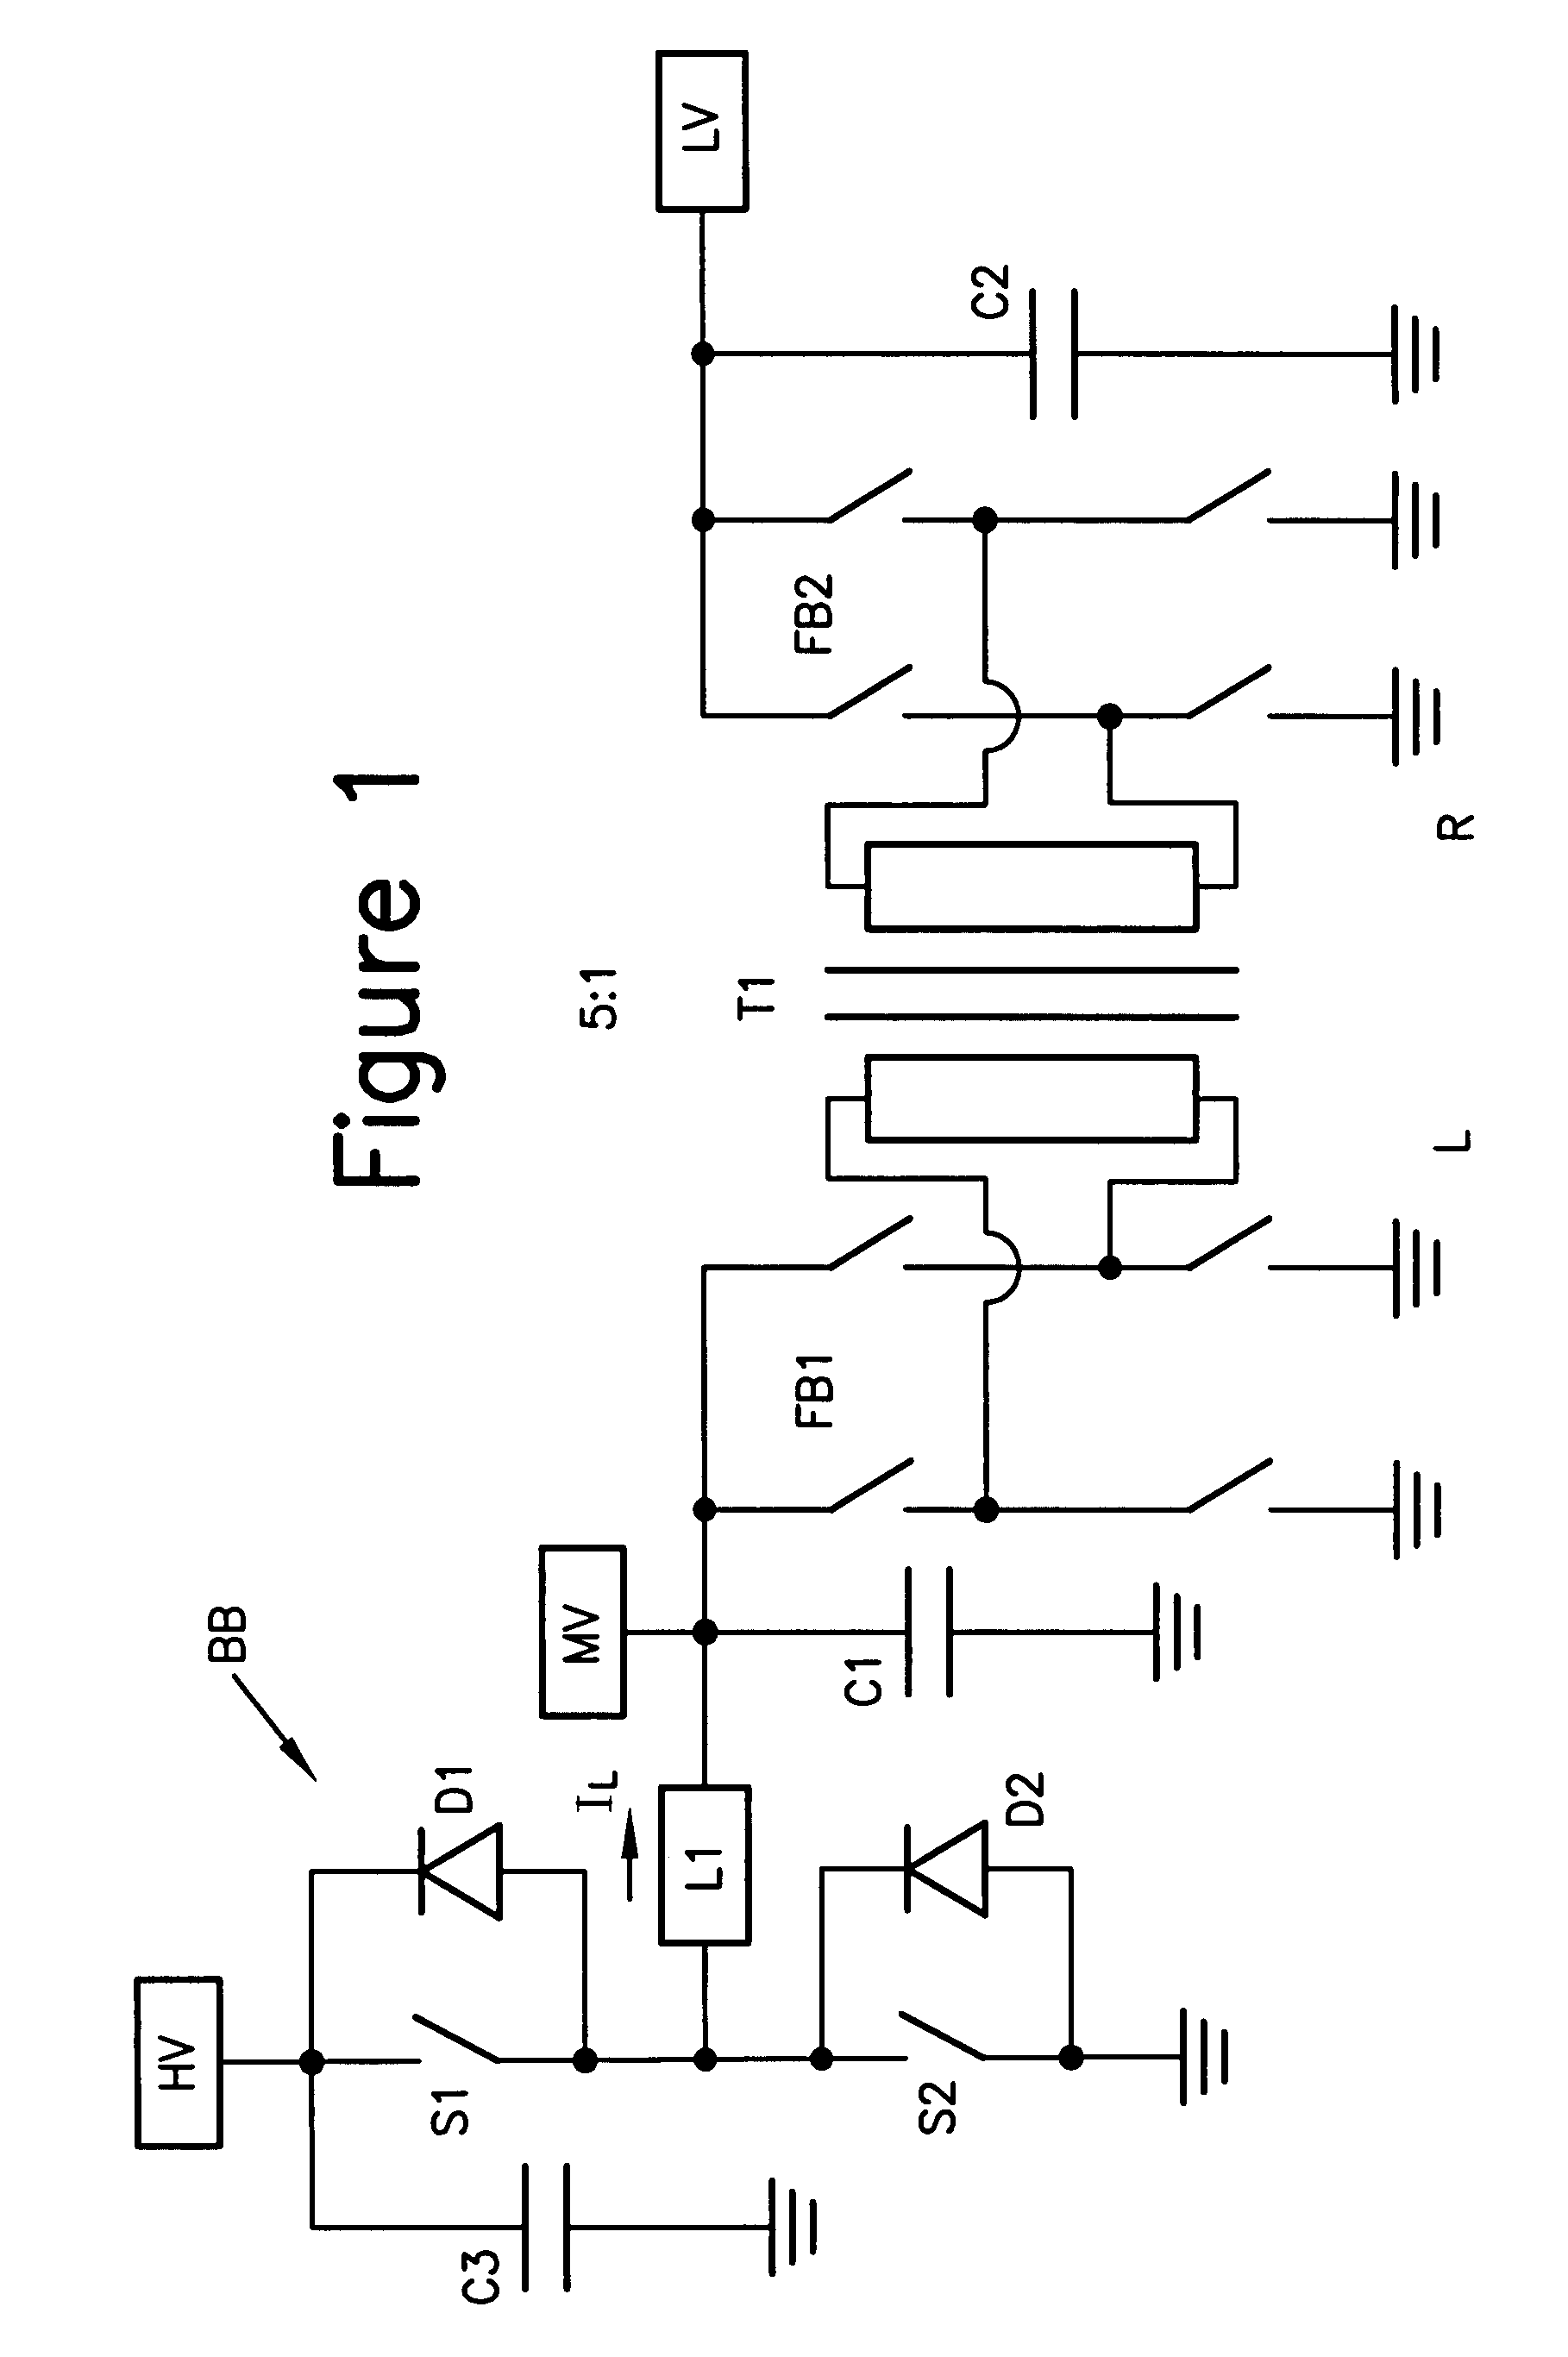 Bi-directional isolated DC/DC converter